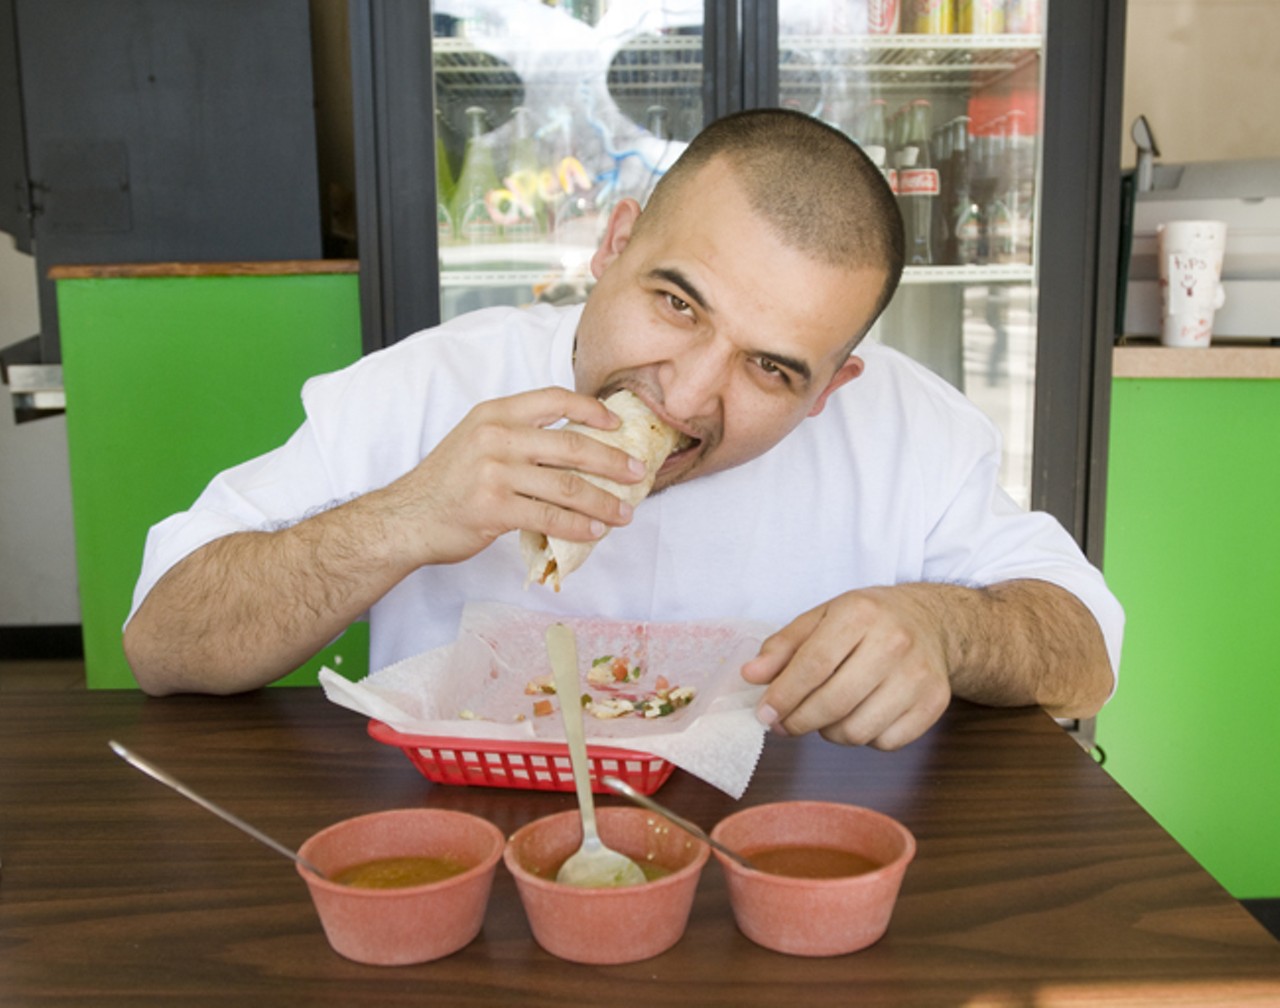 Owner Juan Villa sampling the goods.Read "Taco the Town: Taqueria el Jalape&ntilde;o scores another point for north county in the geographical battle for local Mexican restaurant supremacy" by Ian Froeb.